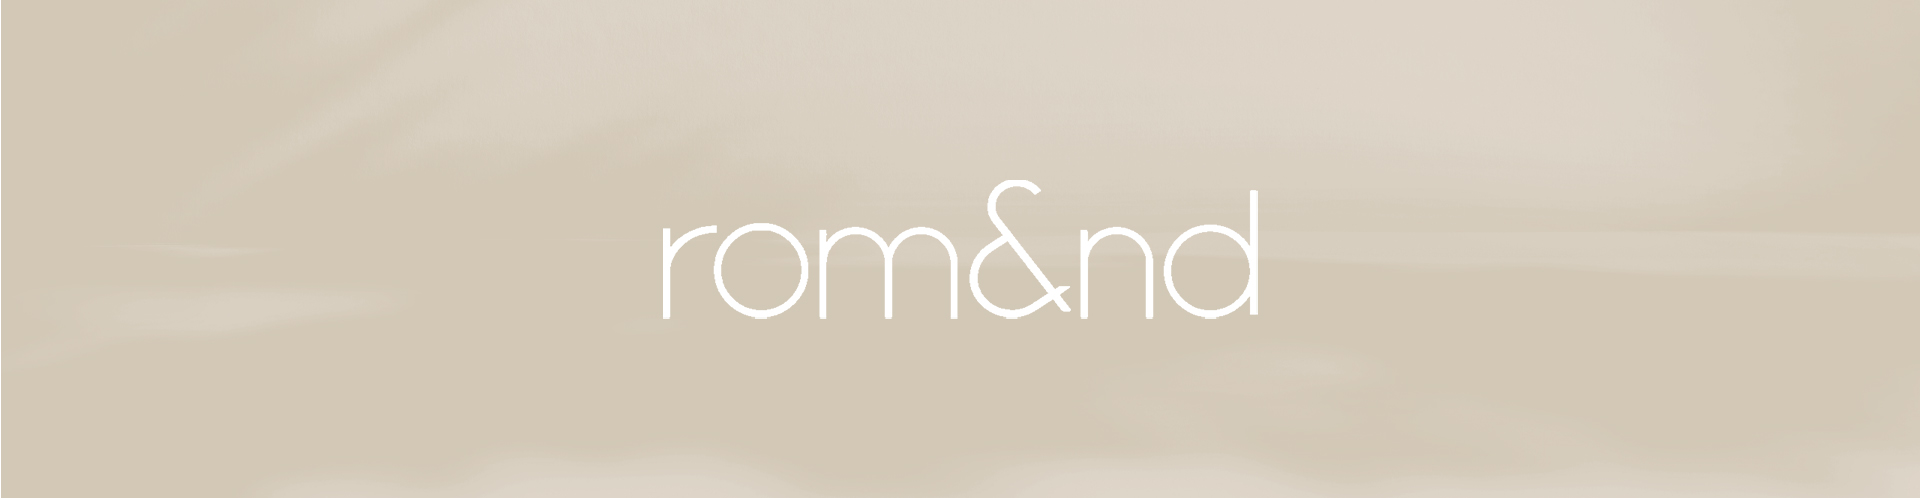 Banner ROM&ND